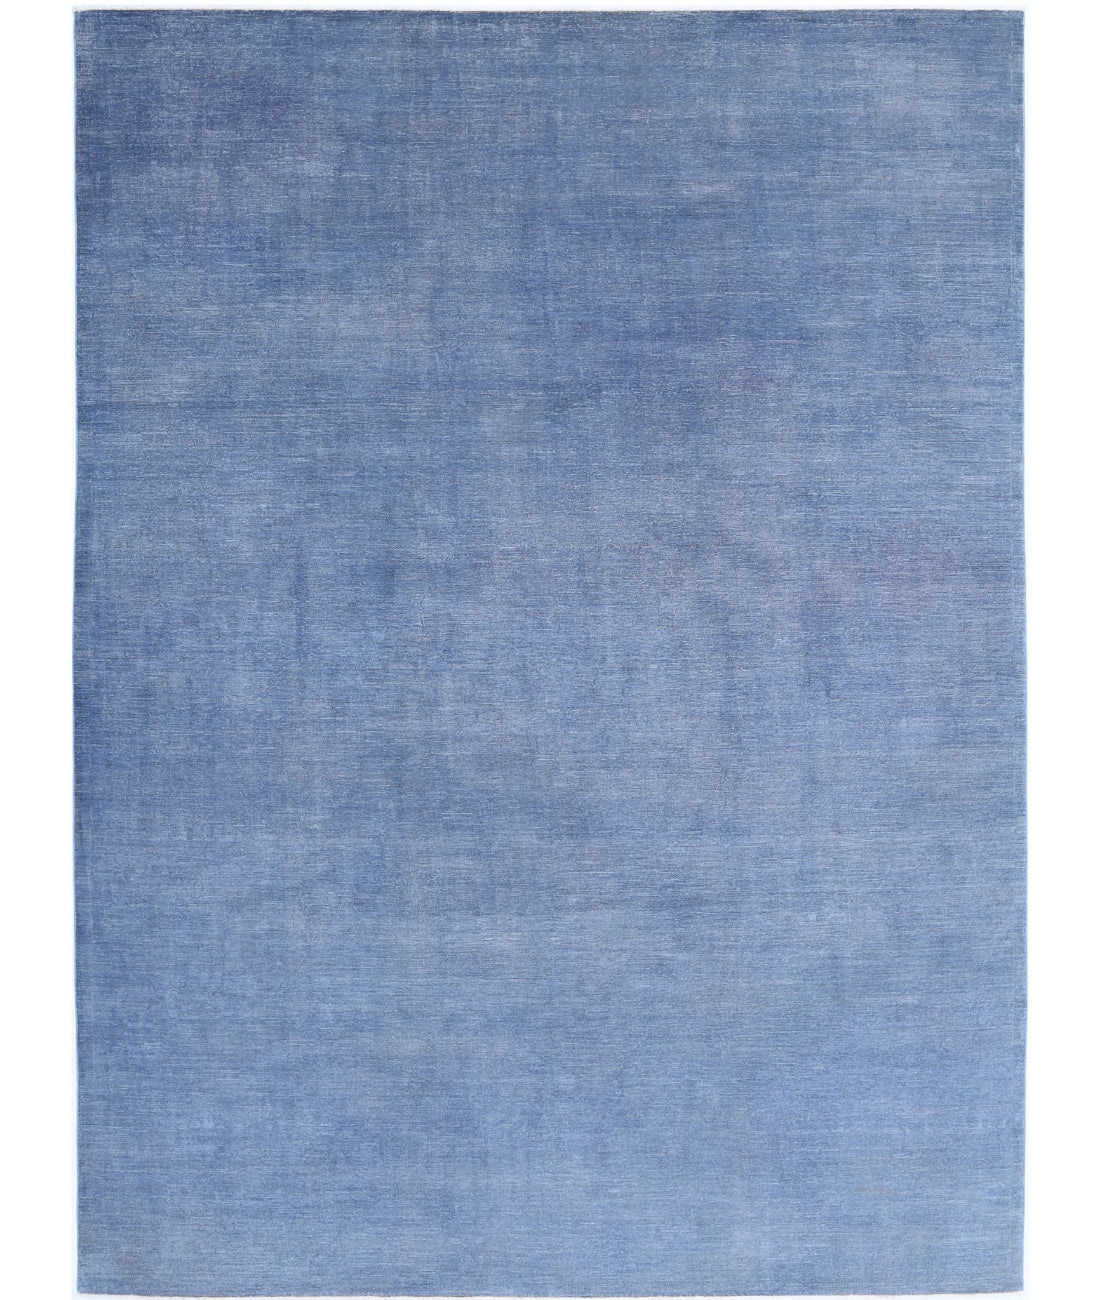 Hand Knotted Overdye Wool Rug - 8'11'' x 12'2'' 8'11'' x 12'2'' (268 X 365) / Blue / Blue